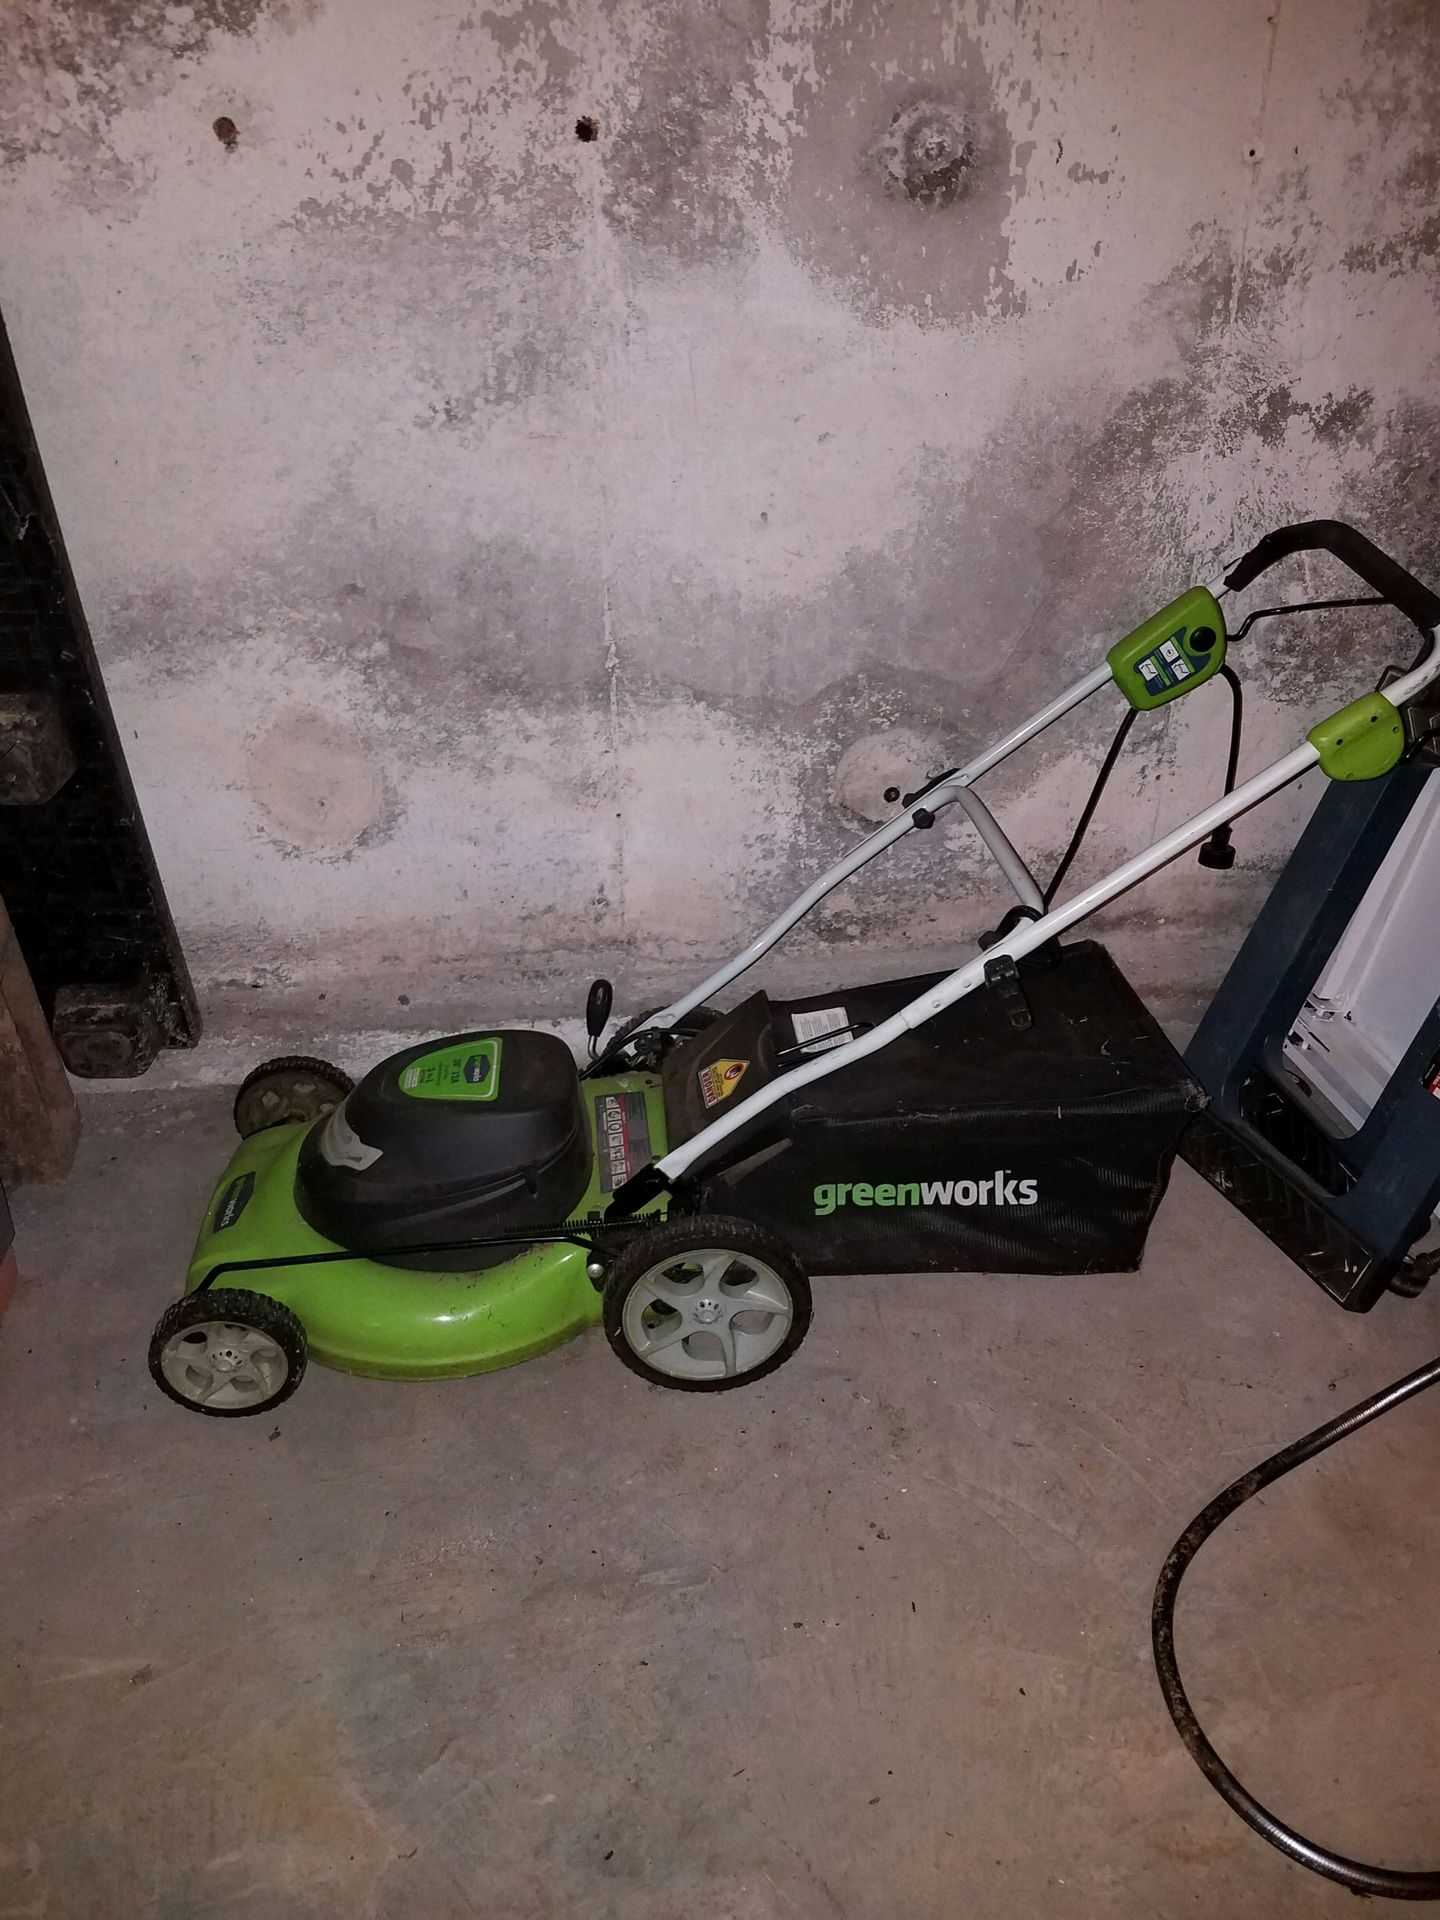 Lawnmower 20” electric green works 3 in 1 mulch bagger sidedischarge.